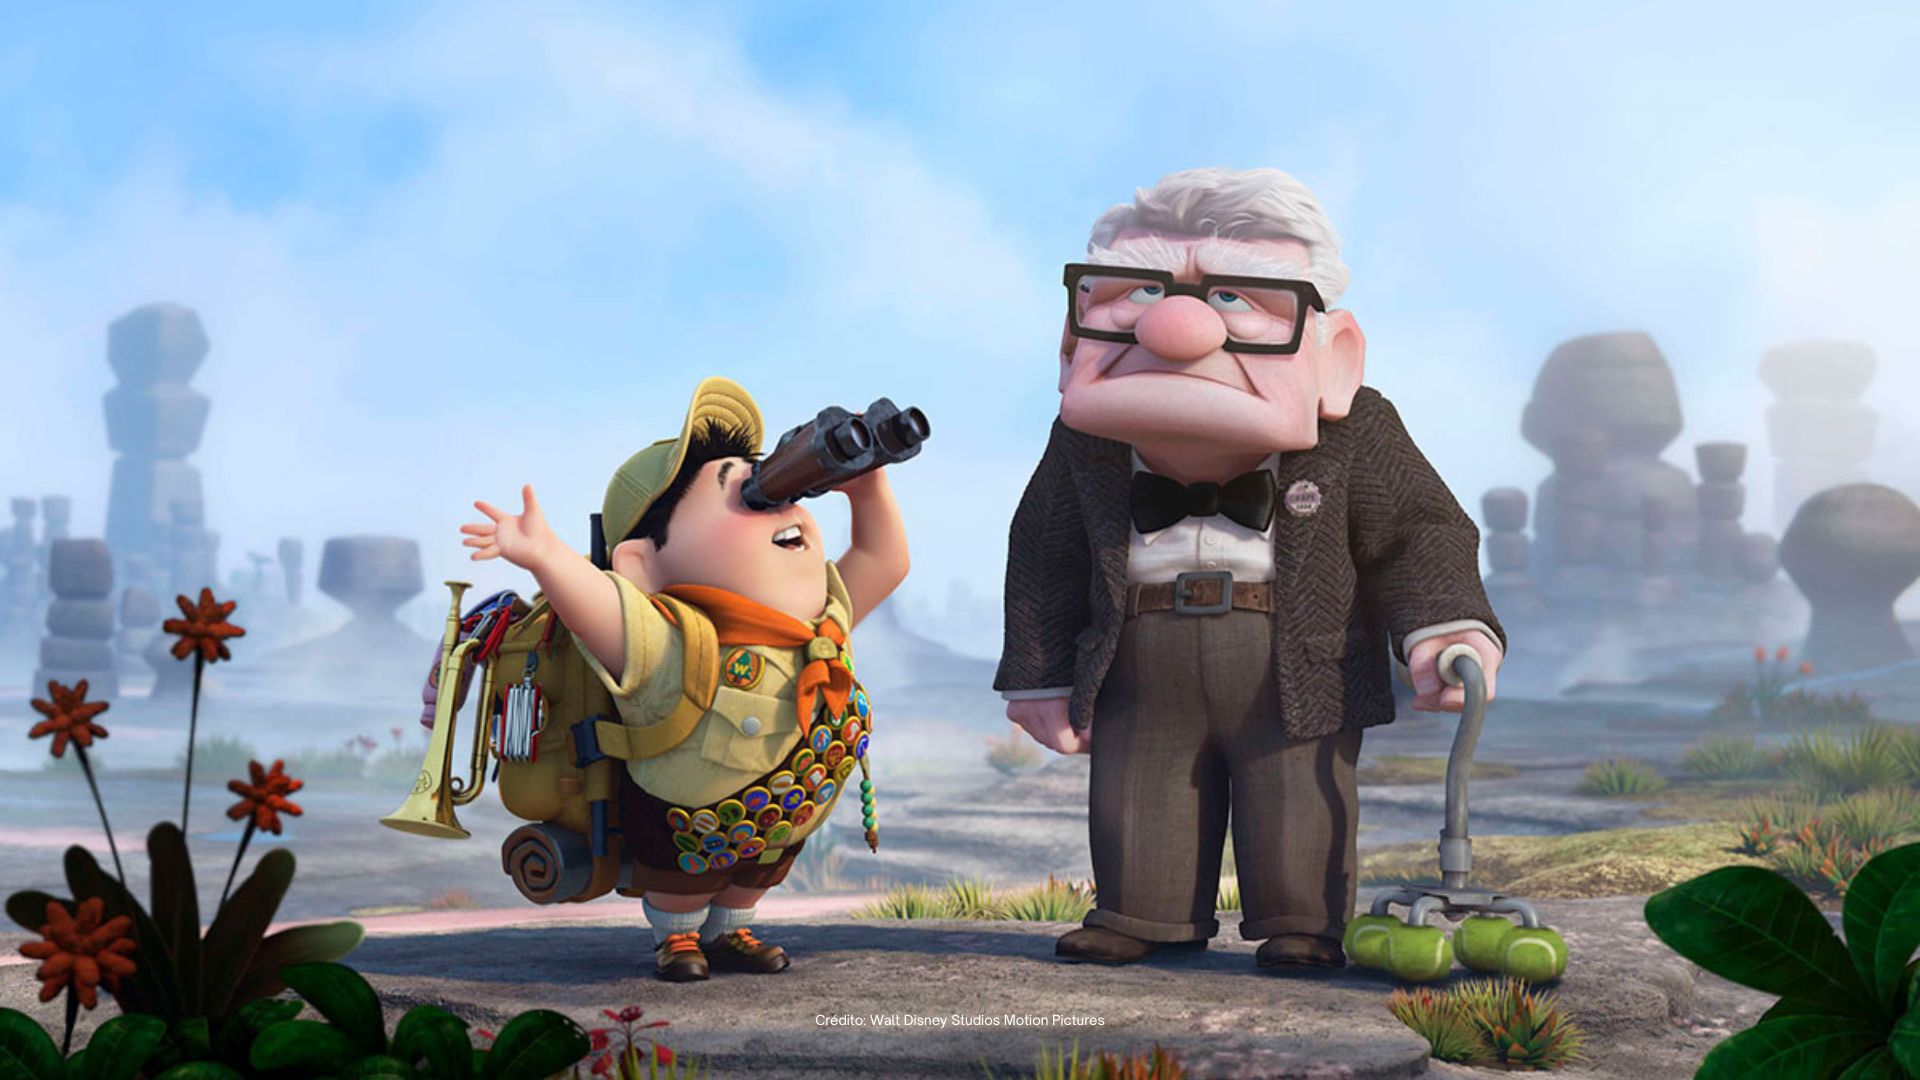 Let's remember when Pixar fulfilled a girl's wish to see 'Up' before she died